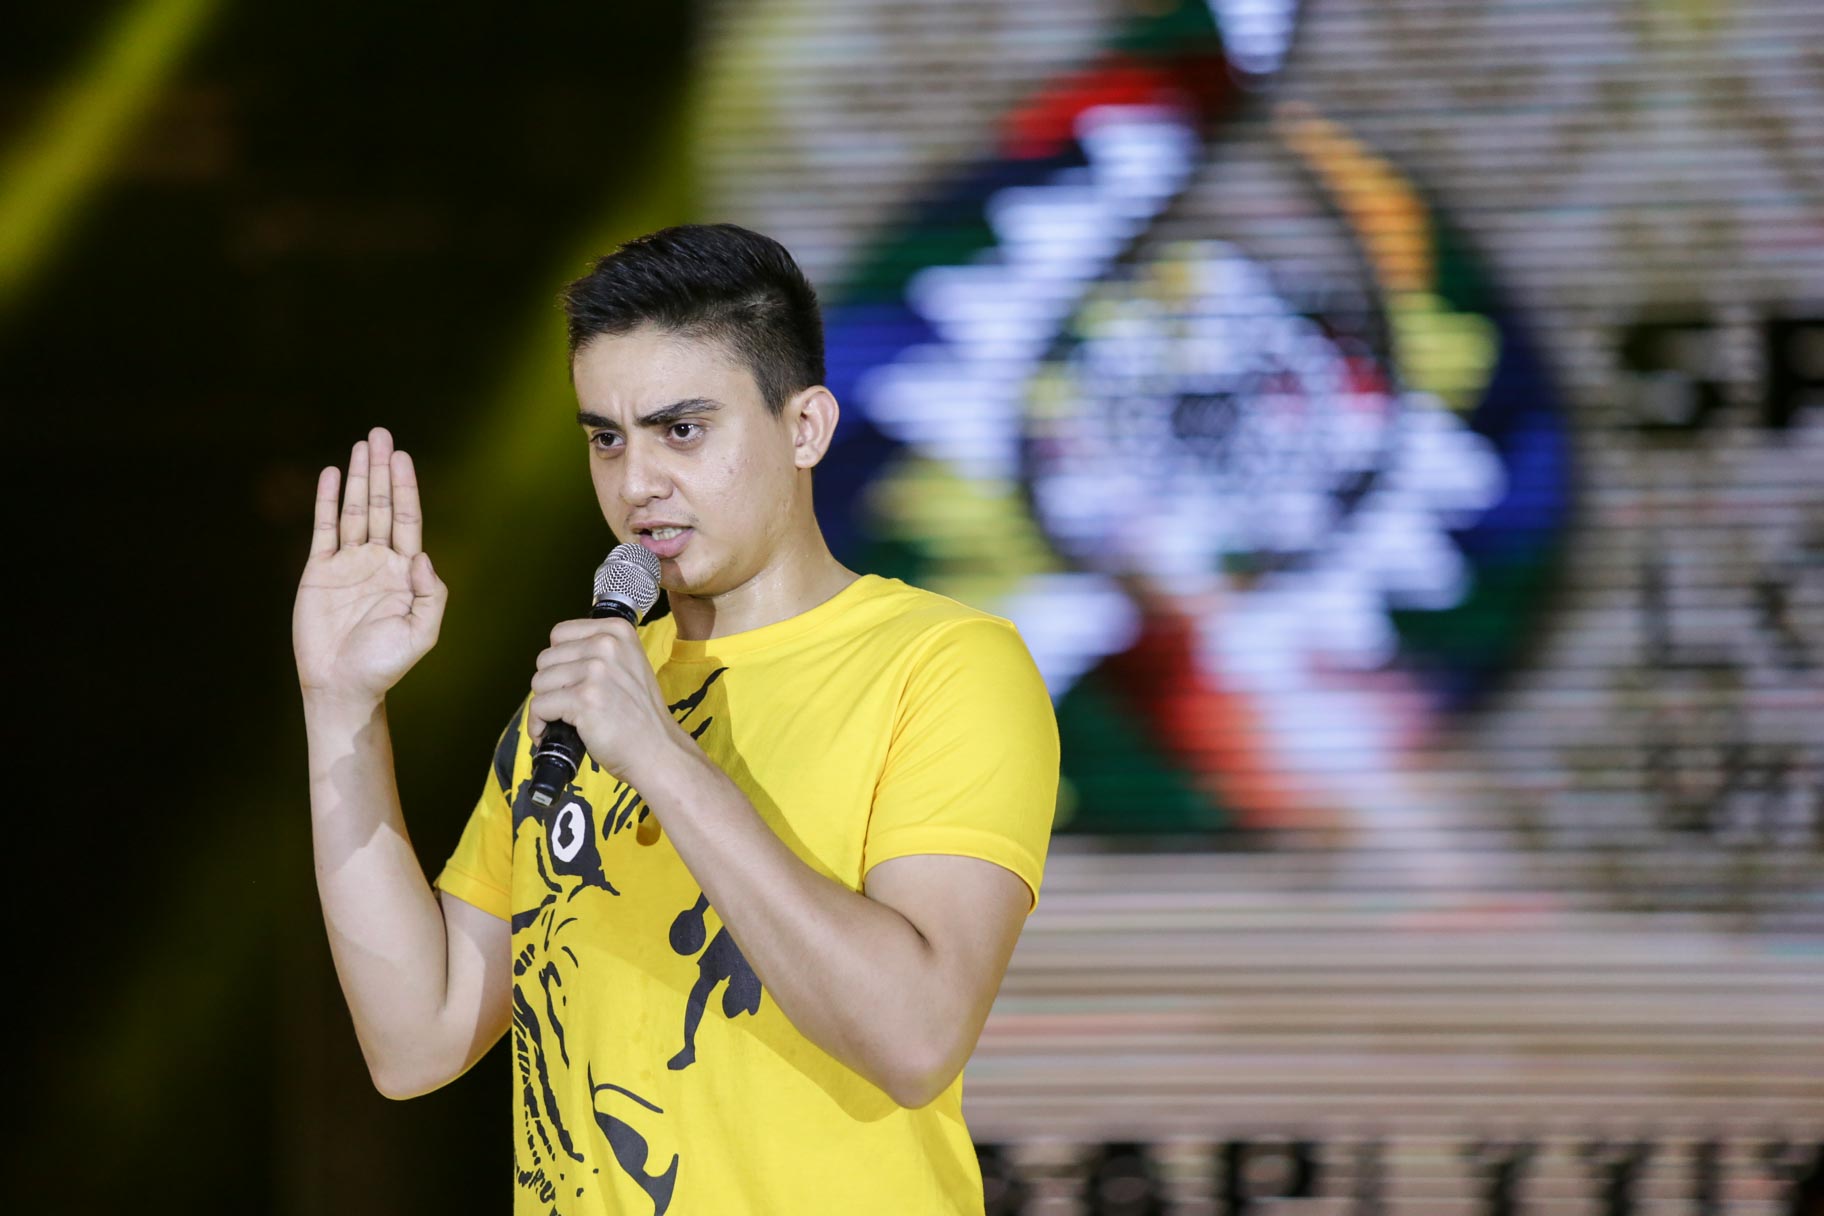 UAAP Season 79 opening ceremonies at the UST campus in Manila. Photo by Tristan Tamayo/INQUIRER.net